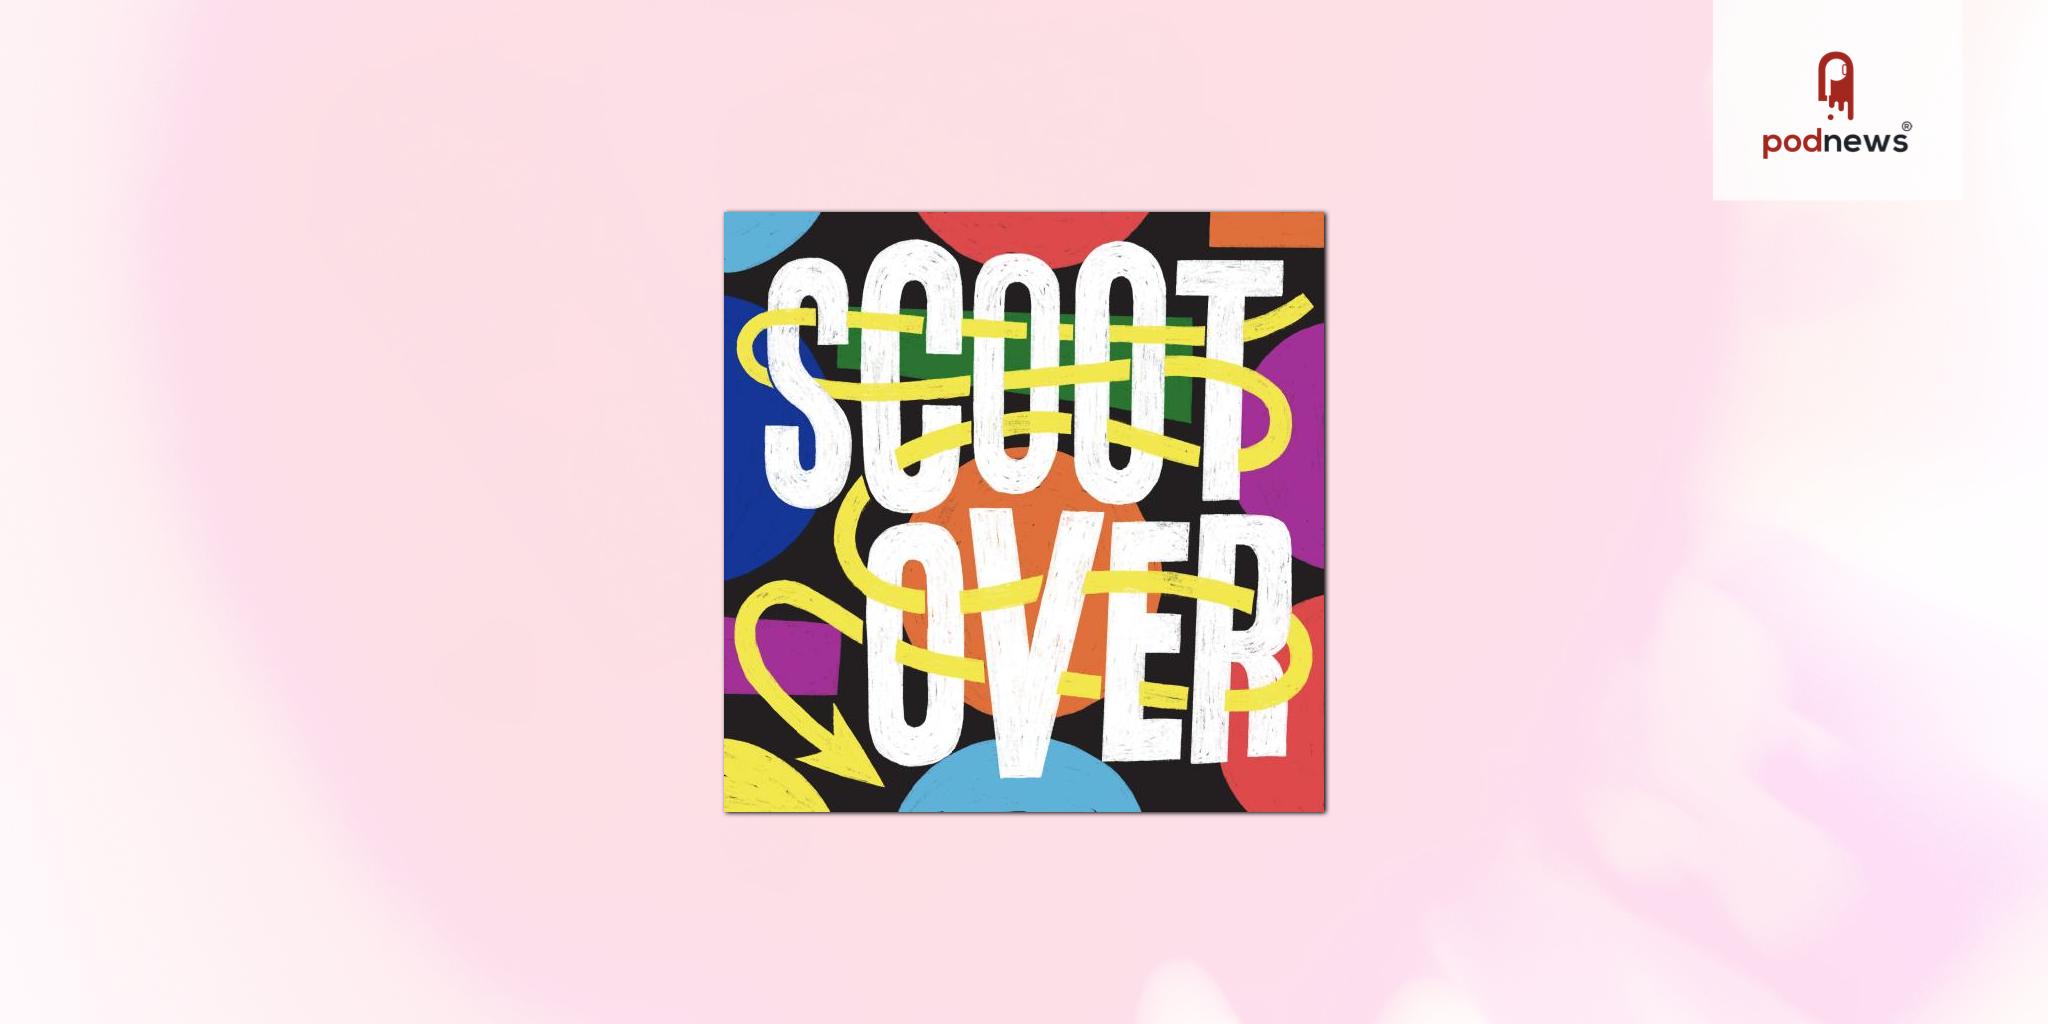 Scoot Over aims to bridge cultural and societal divides one podcast episode at a time